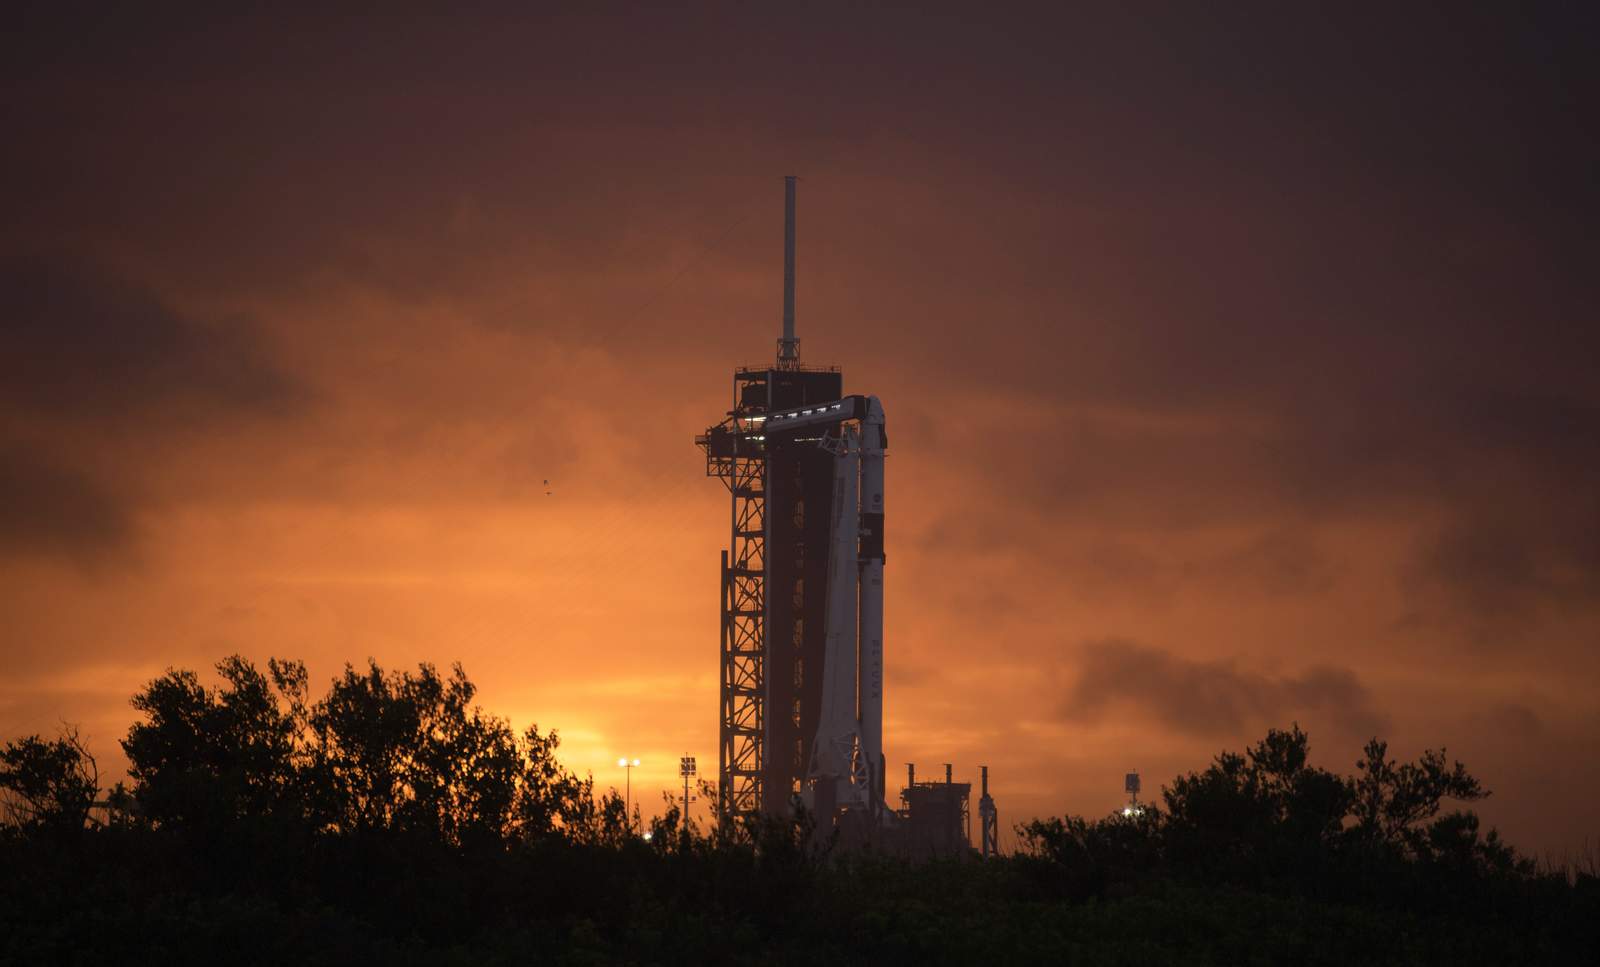 Countdown to launch: Live views of SpaceX Falcon 9, Crew Dragon